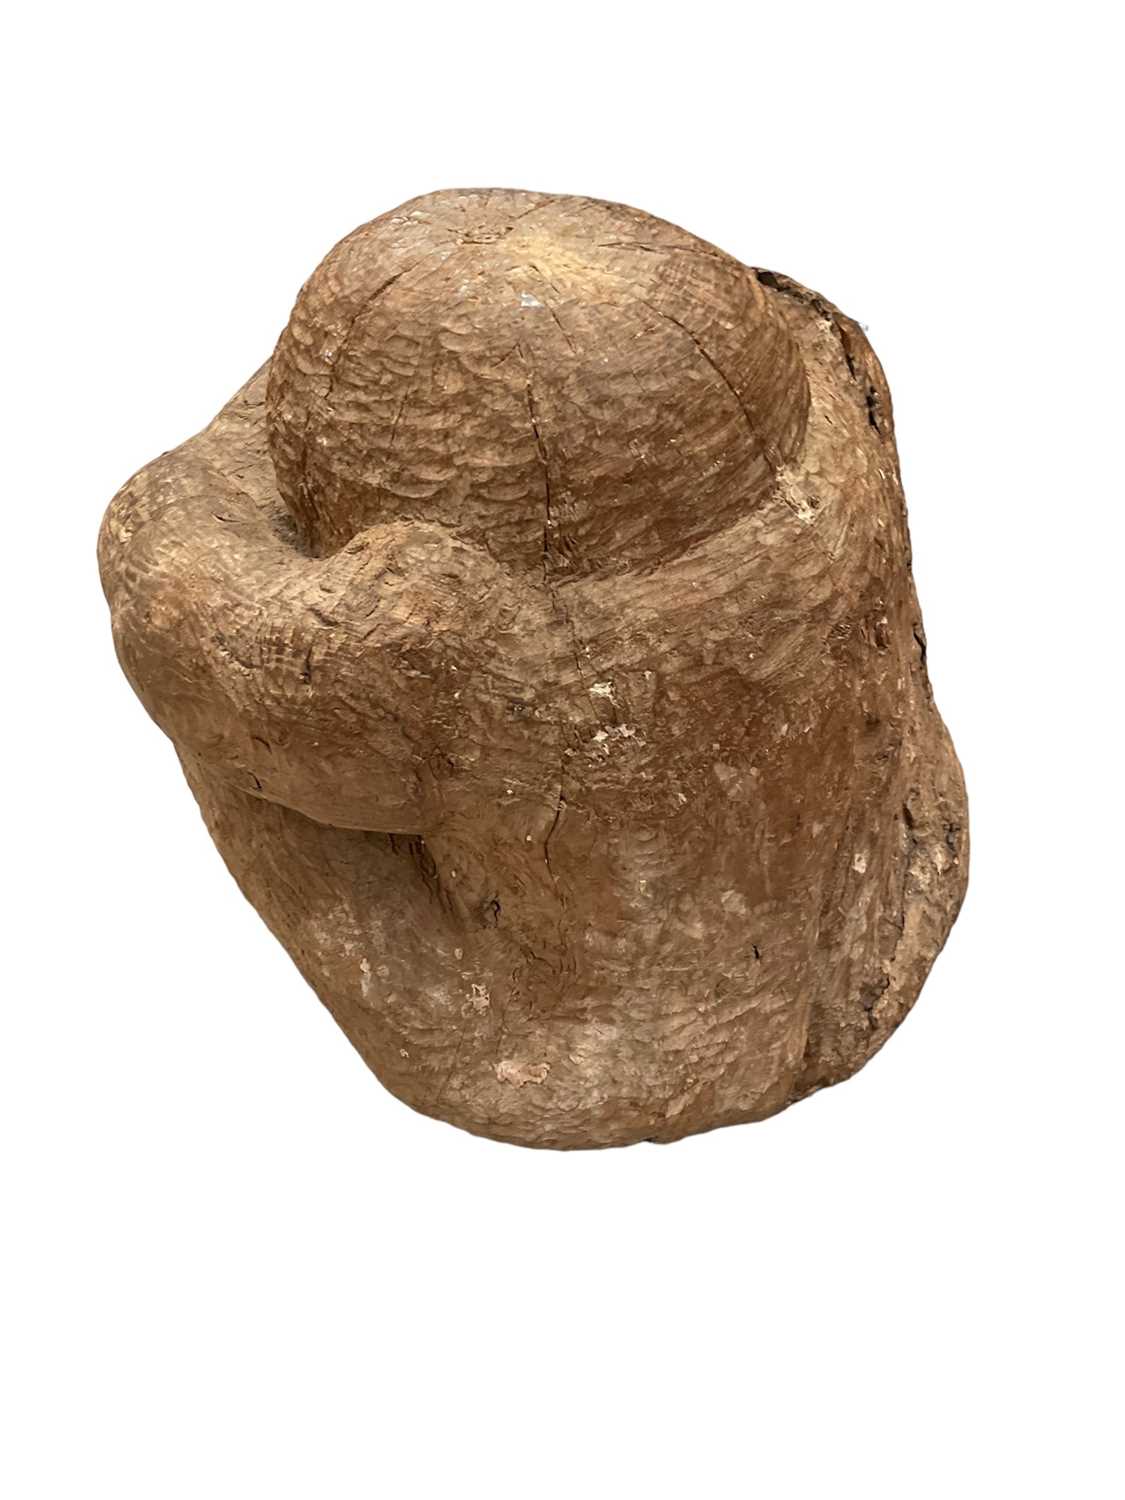 Unusual carved sculpture of a seated man, carved from the solid, 43cm high - Image 2 of 3